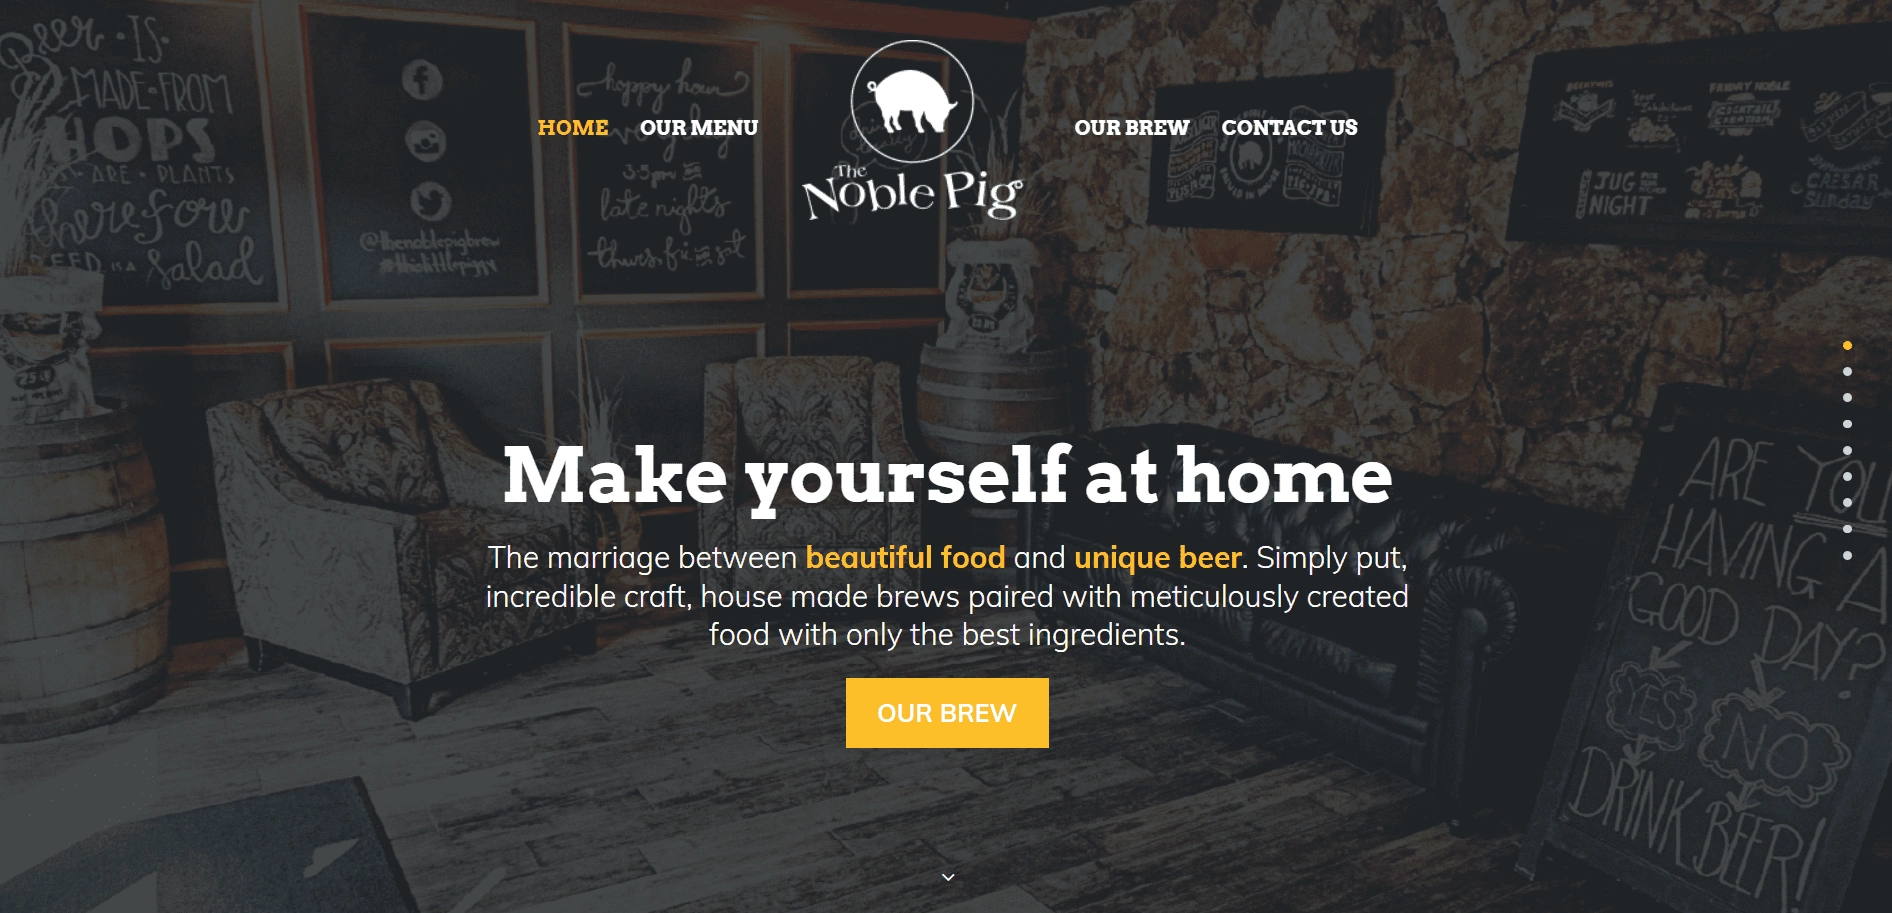 The Noble Pig Brewhouse